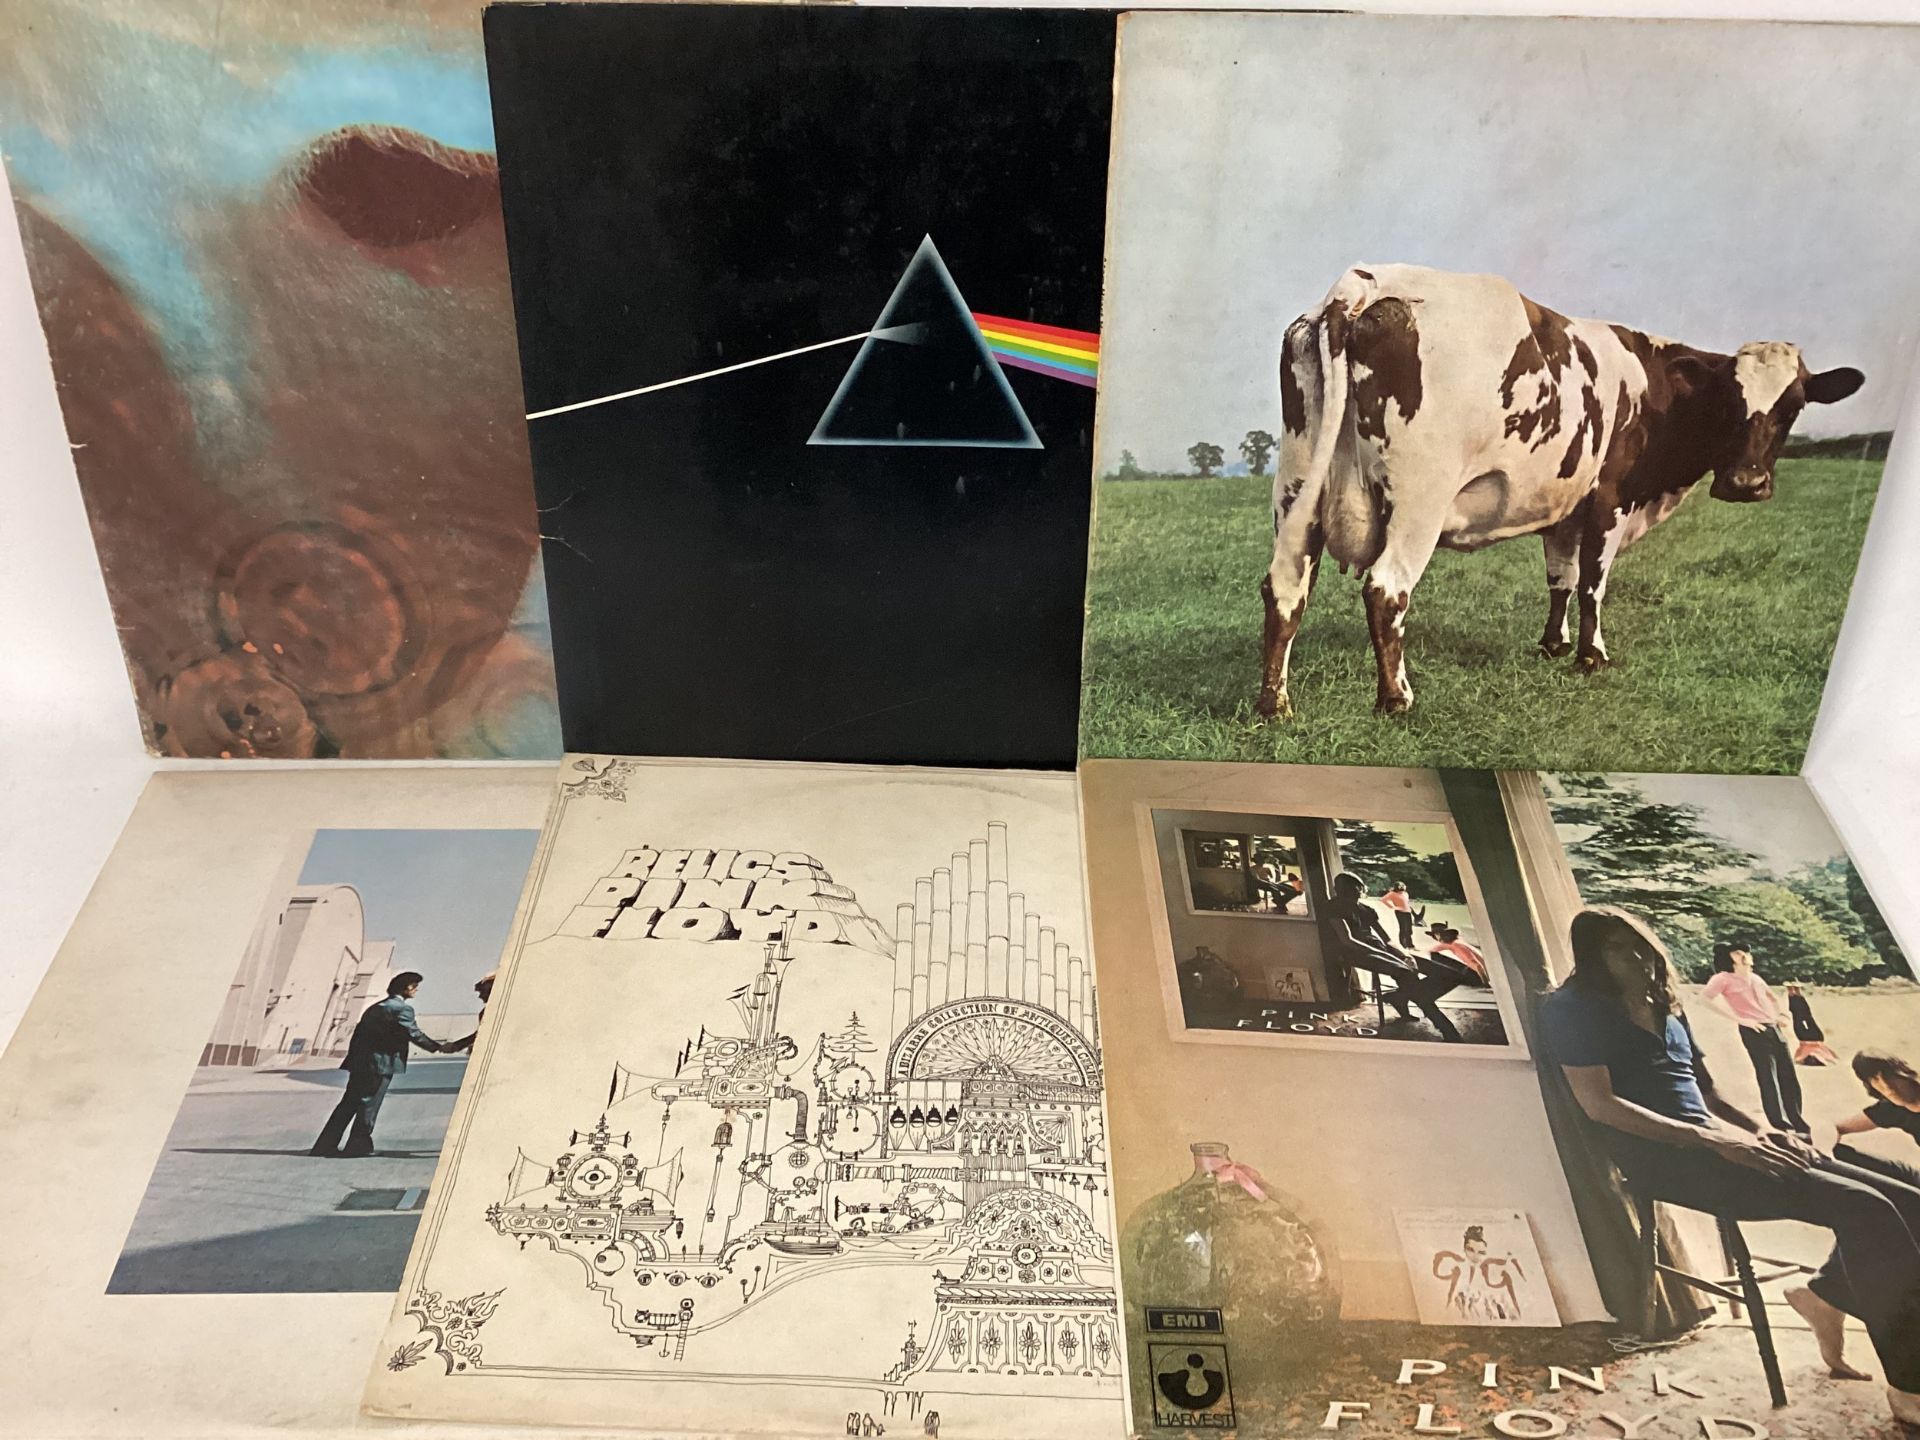 PINK FLOYD VINYL LP RECORDS X 6. Titles here include - Meddle in Gatefold textured sleeve SHVL 795